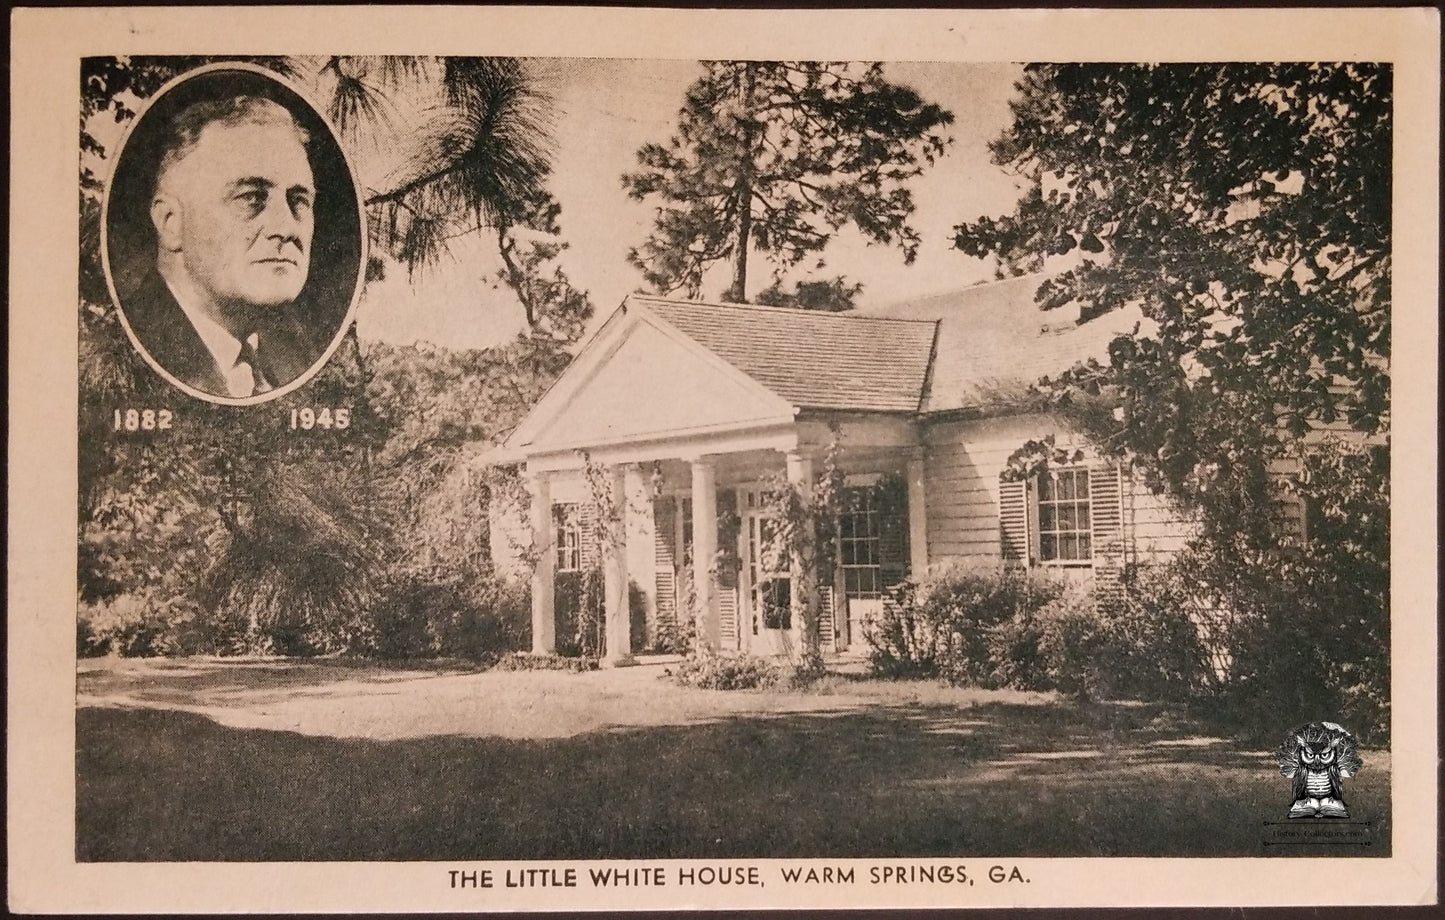 c1940s The Little White House Warm Springs GA FDR Postcard - Hancock's Variety Store Warm Springs GA - Eagle Post Card View Co NY NY